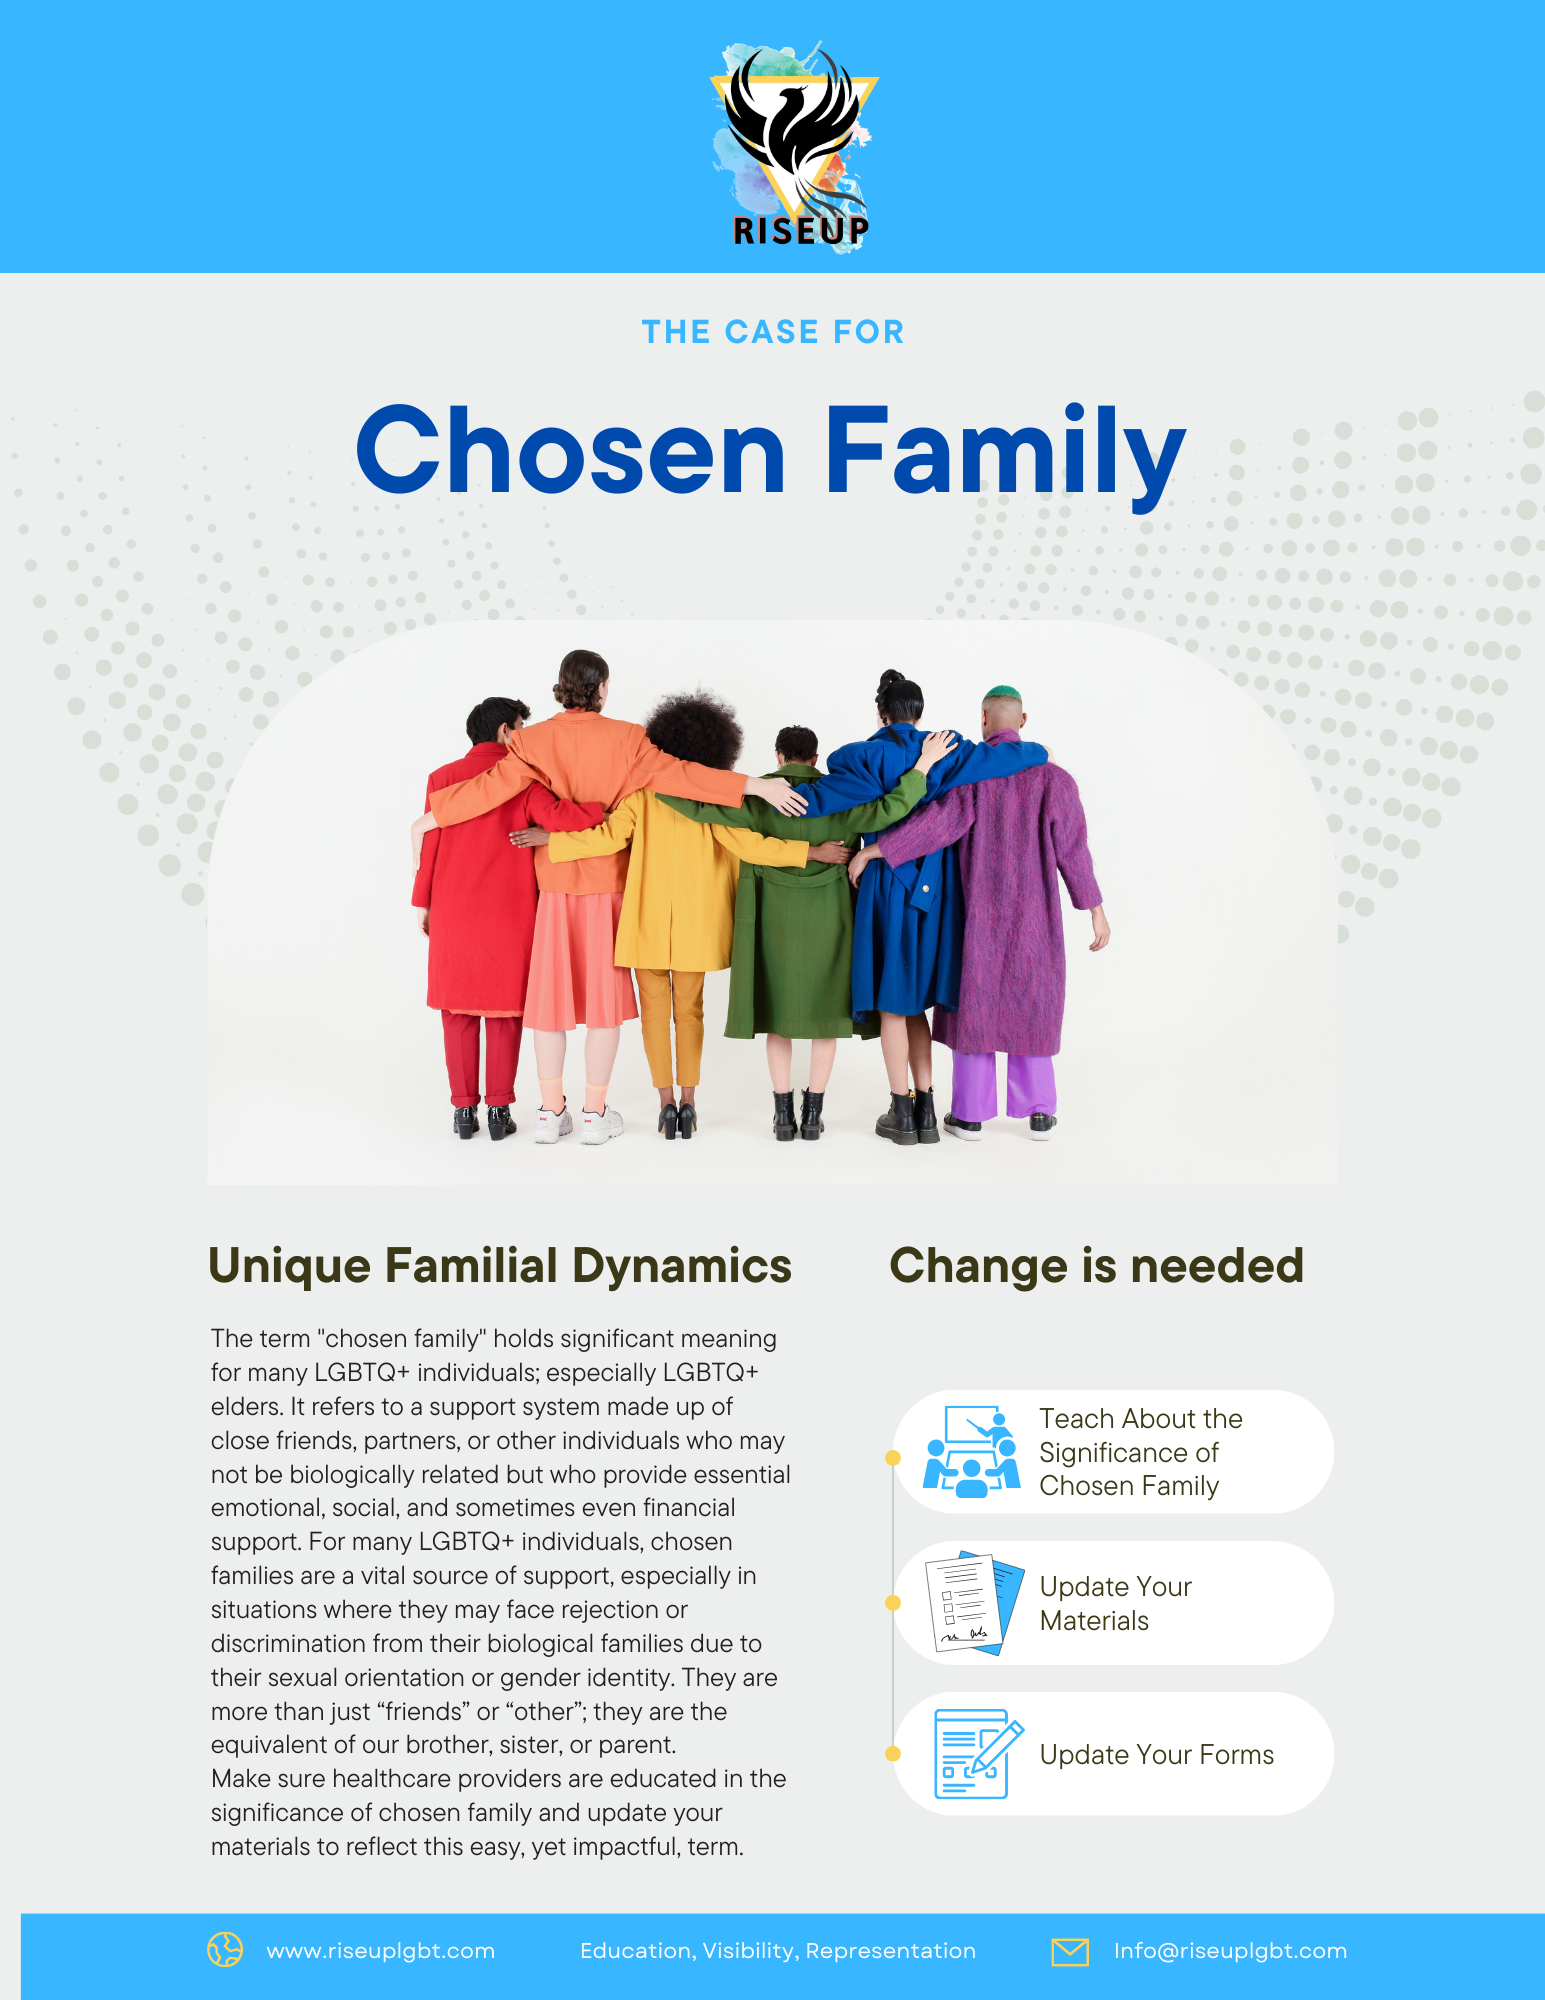 The Significance of Chosen Family